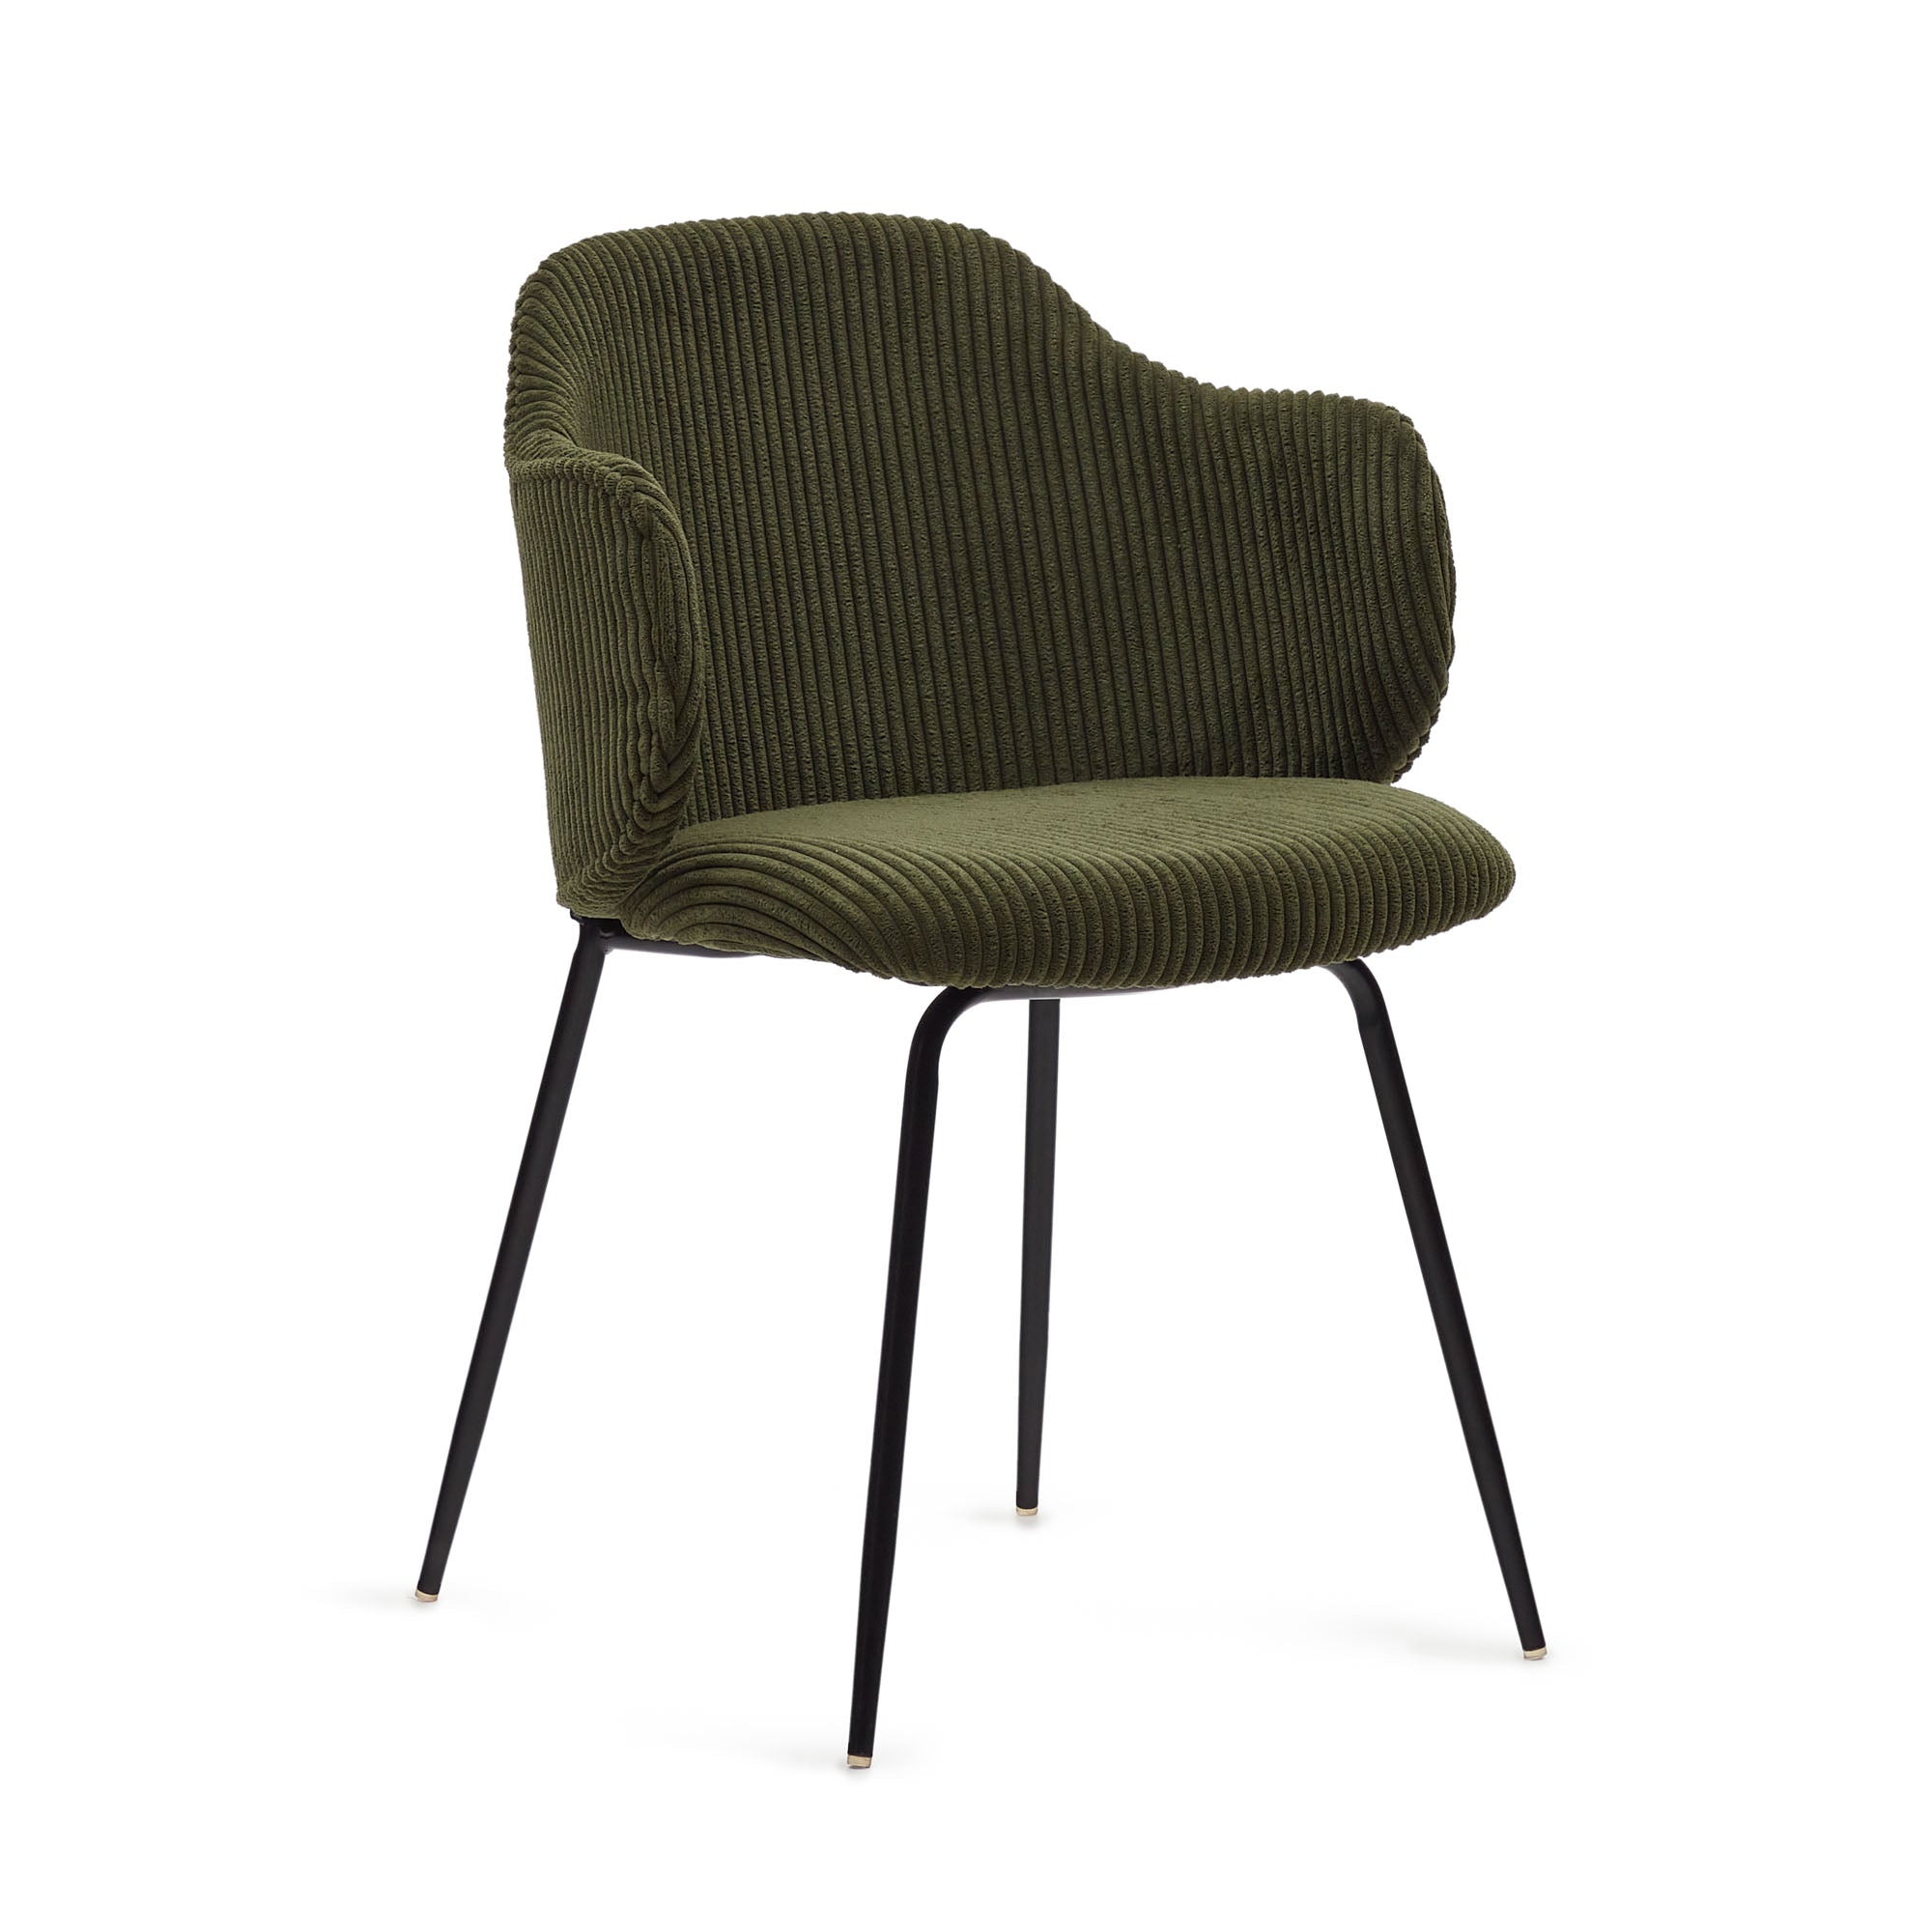 Yunia chair in green wide seam corduroy and steel legs in a painted black finish